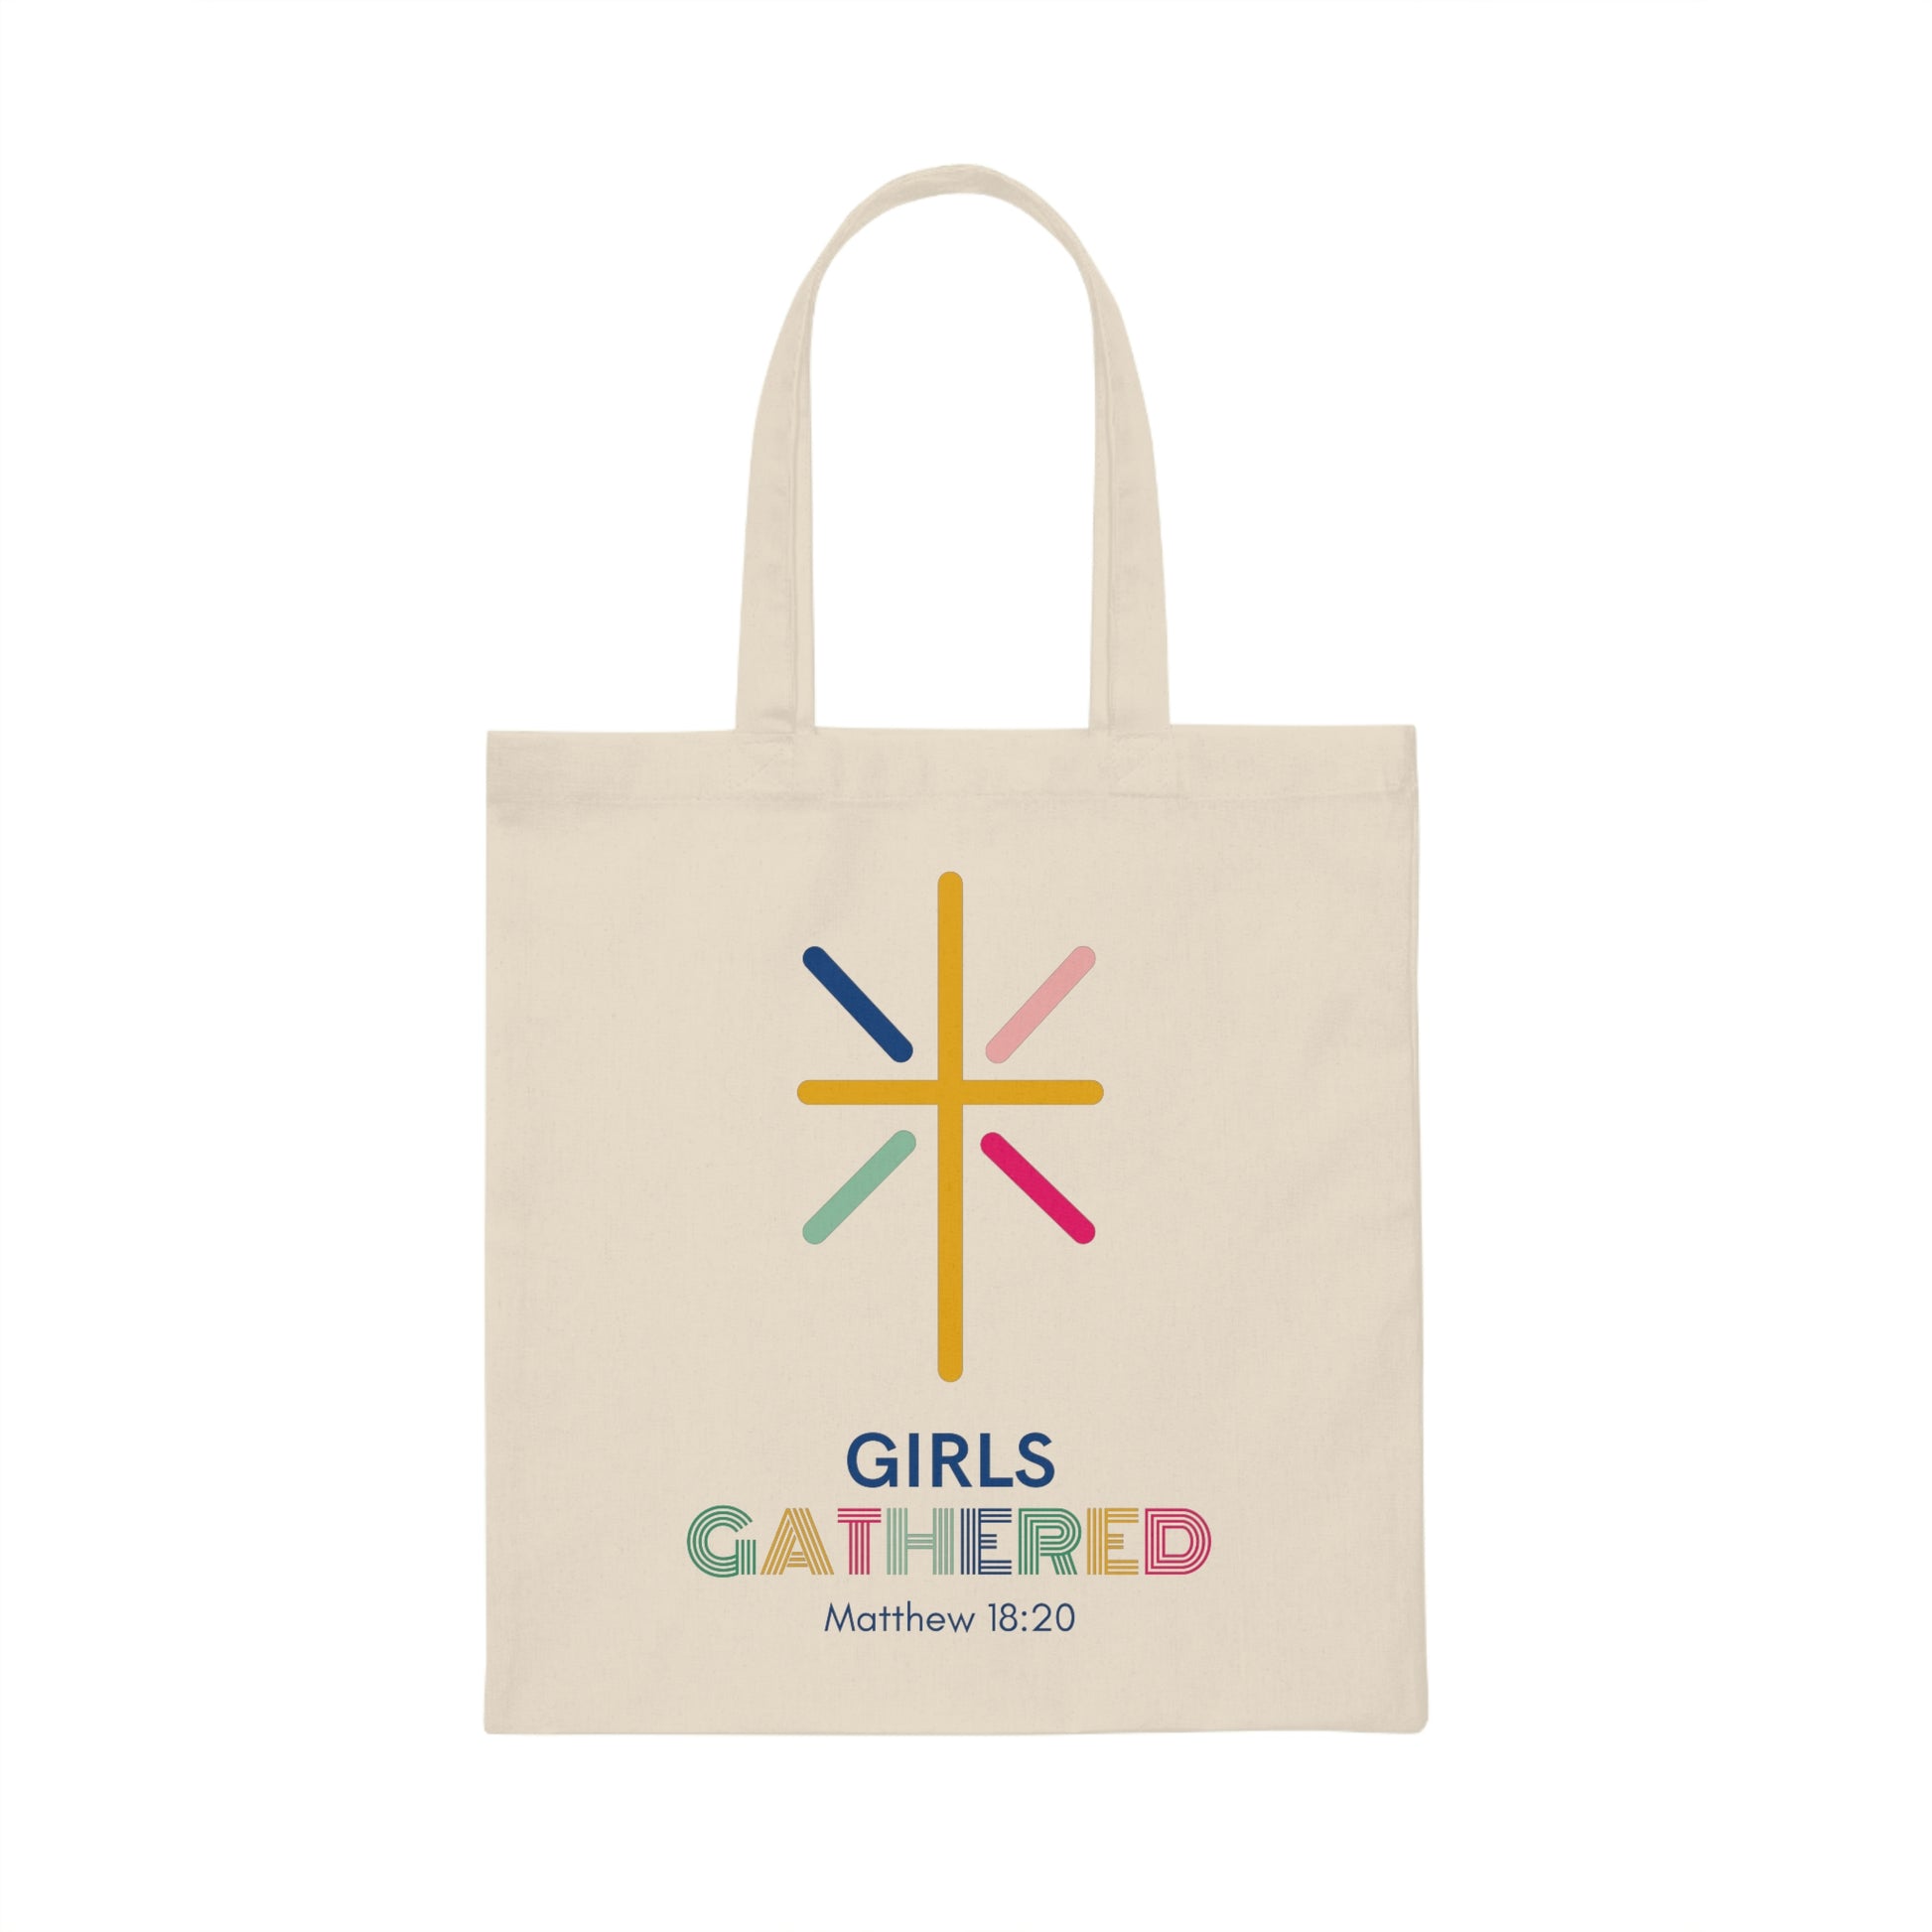 Christian Women or Girls Bag for a small Life Group.